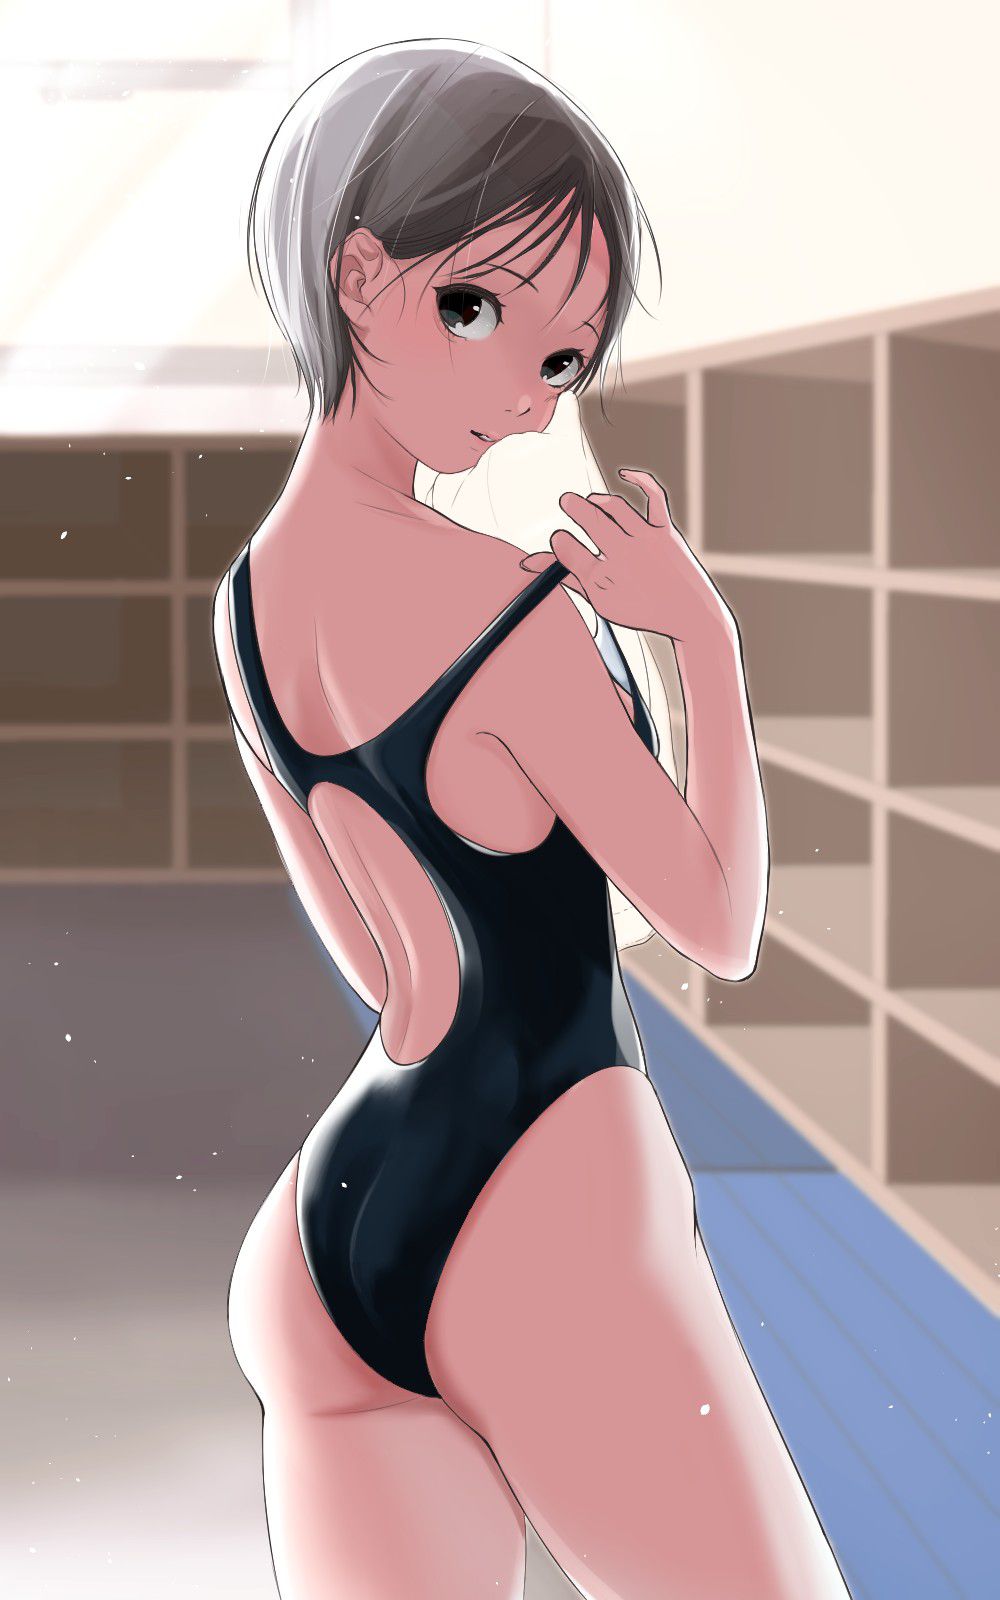 Swimming swimsuits are pitchy, but that's great, isn't it? I don't like the side that wears it. 17